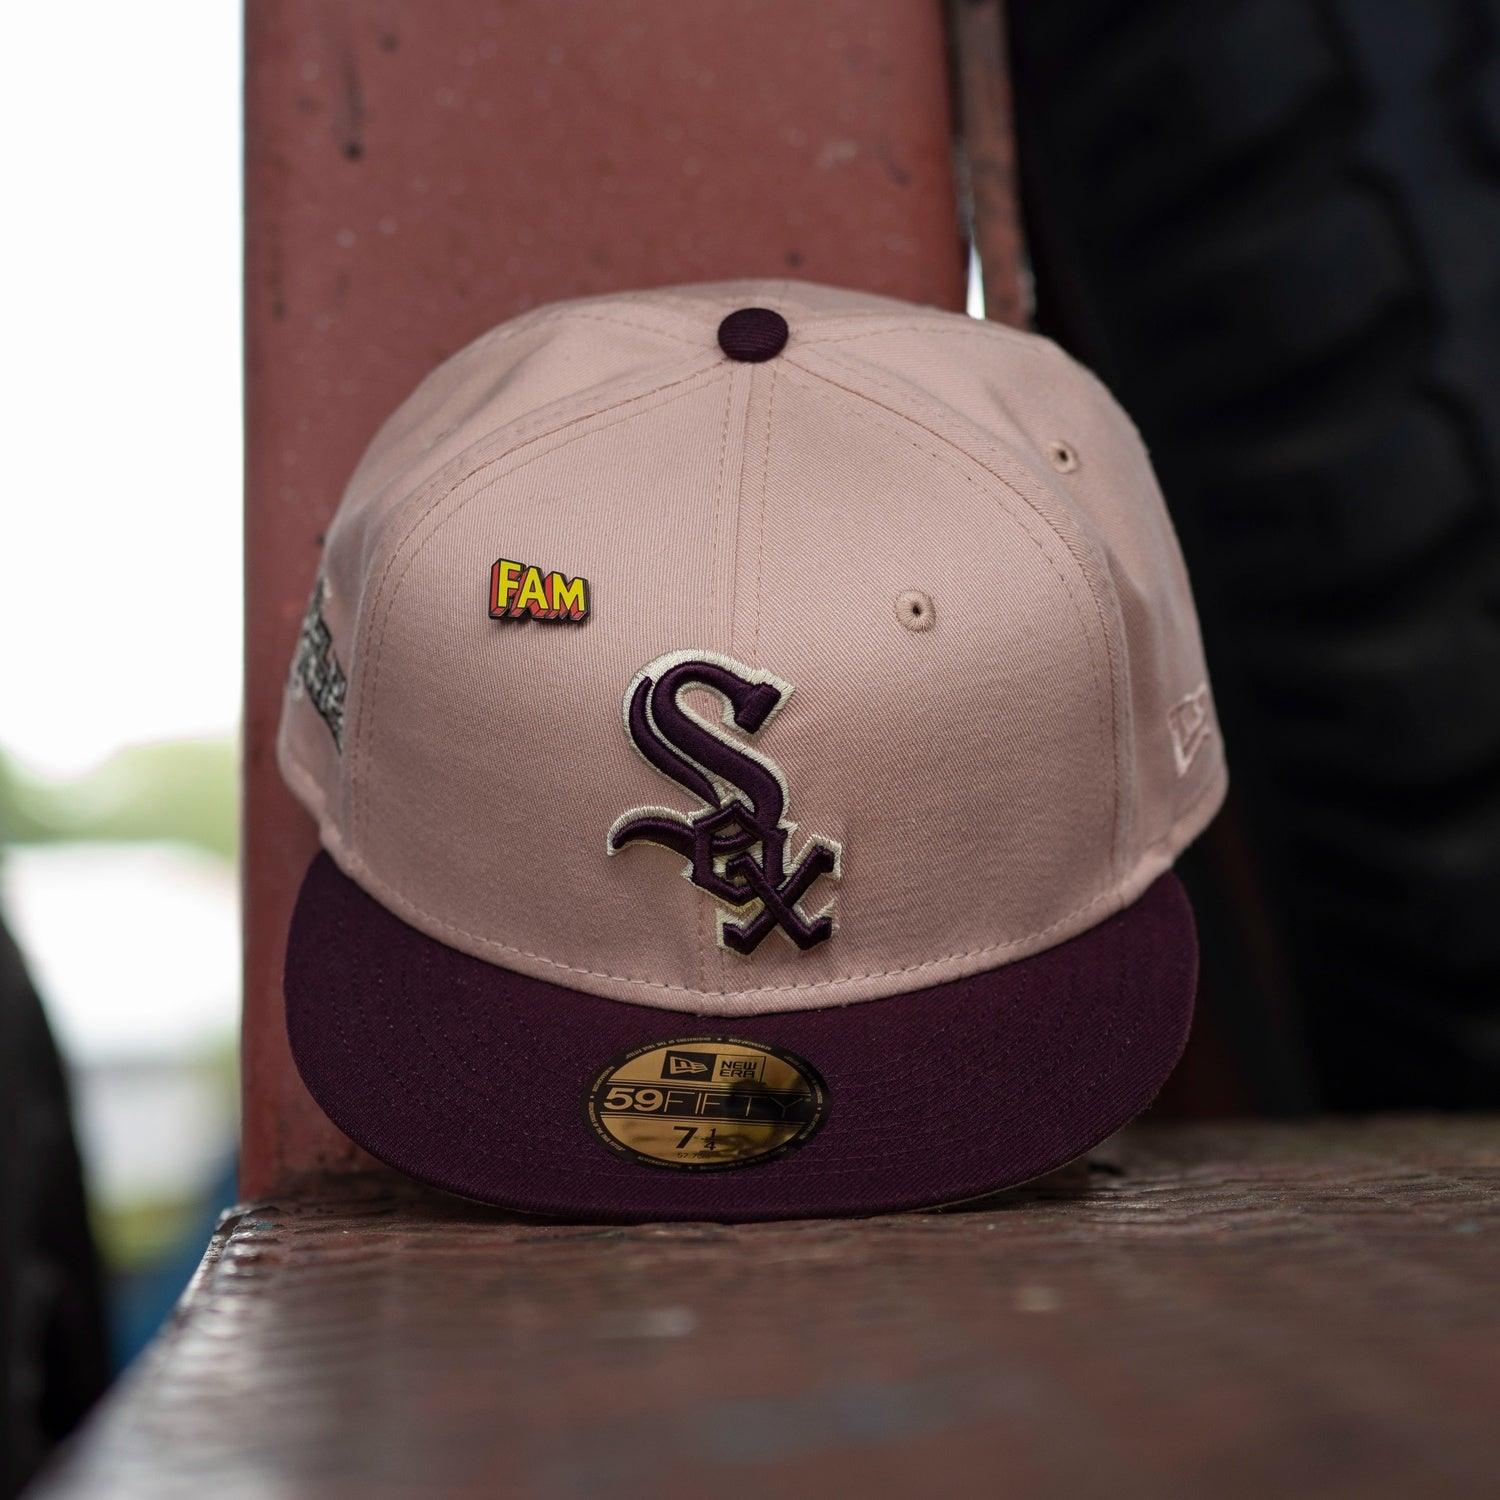 NEW ERA 59FIFTY MLB CHICAGO WHITE SOX WORLD SERIES 2005 TWO TONE / SOFT YELLOW UV FITTED CAP - FAM